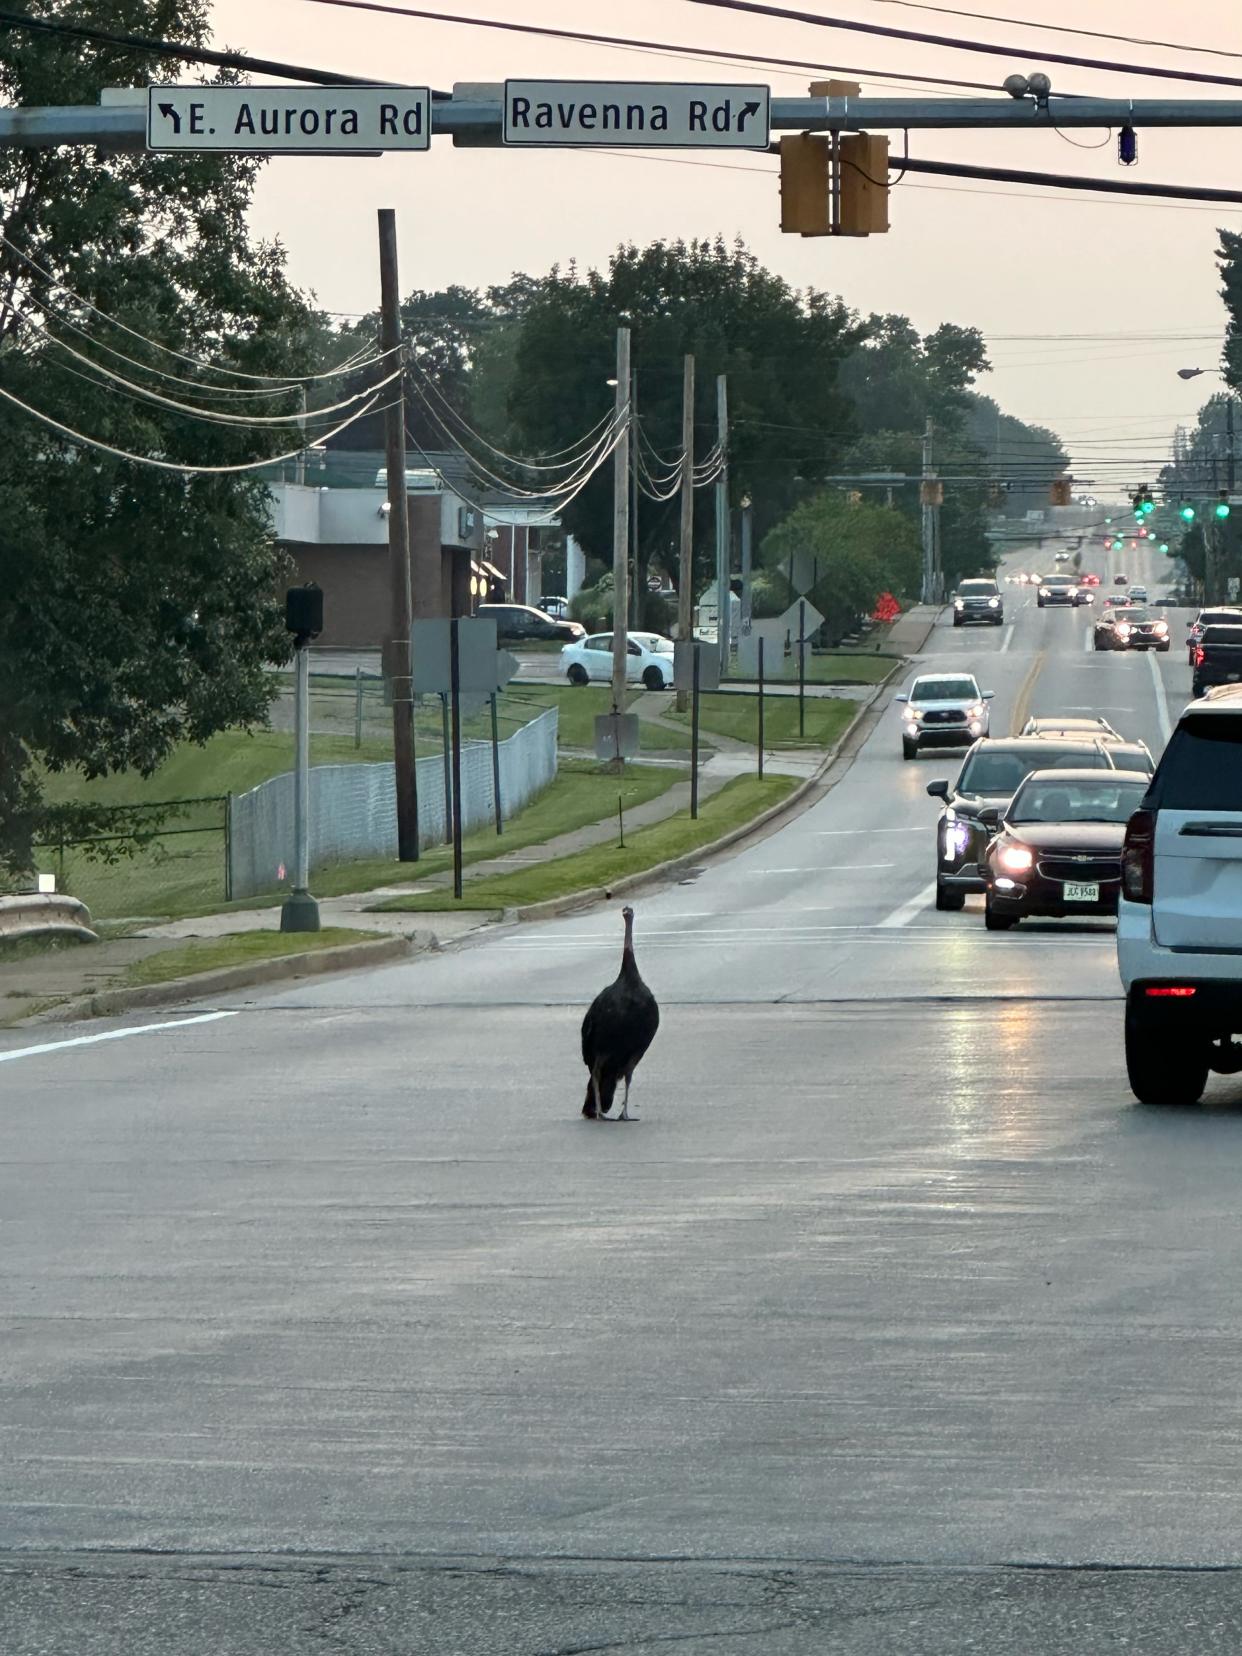 "Ralph the Twinsburg Turkey" strolling down the middle of the road shortly before his demise. The bird had been a presence in the city for about four months before it was hit by a car.